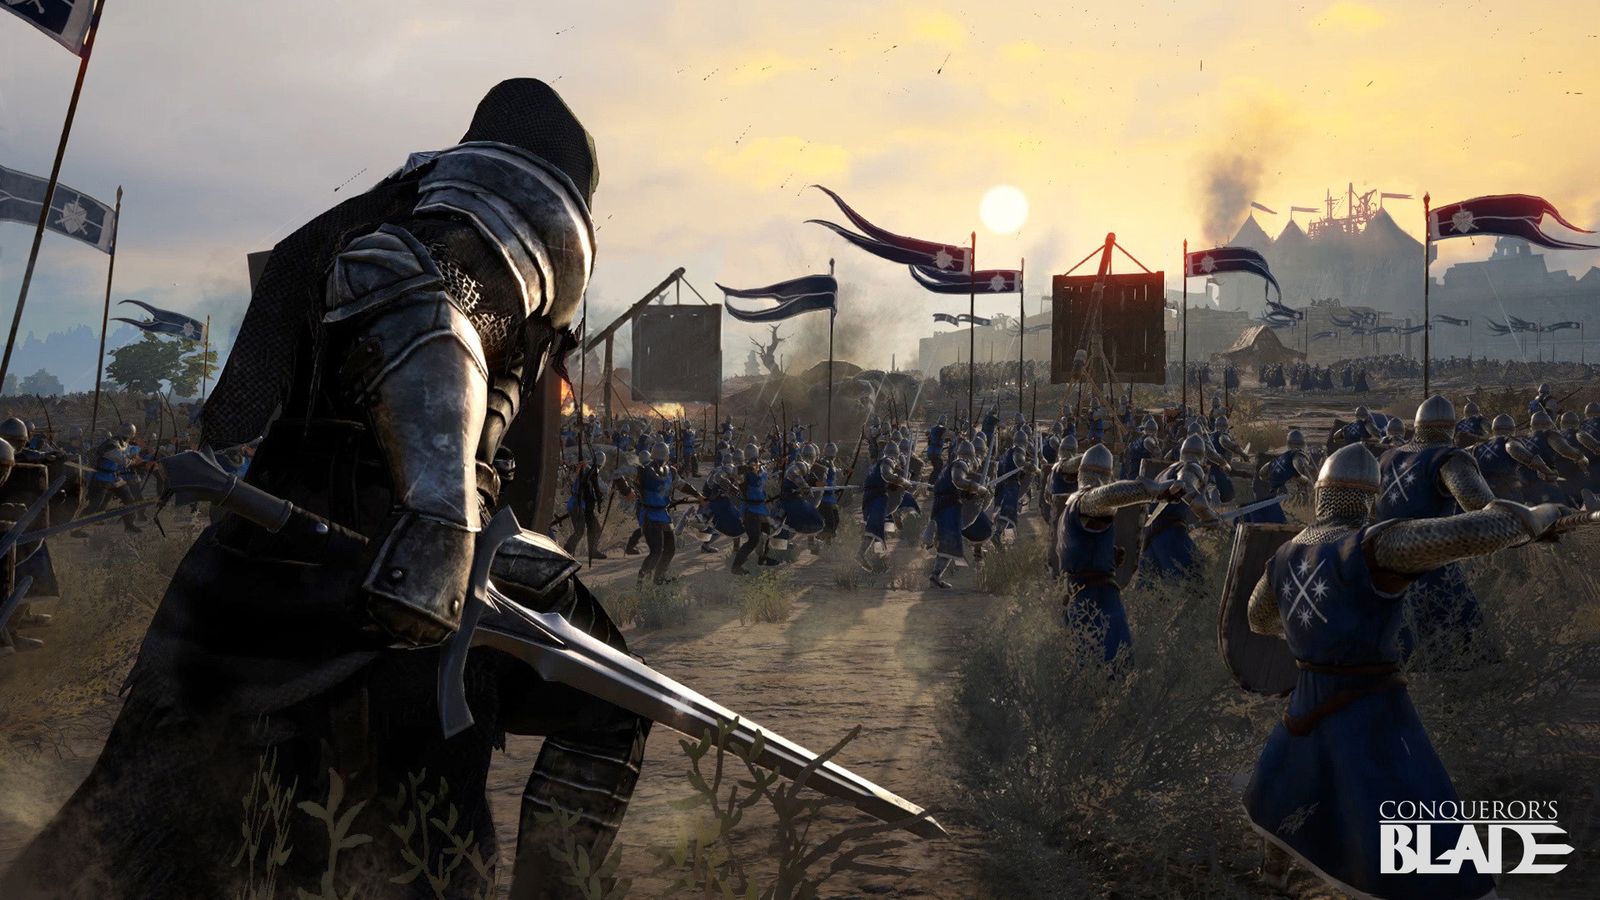 Image of a sword-wielding soldier heading into battle in Conqueror's Blade.